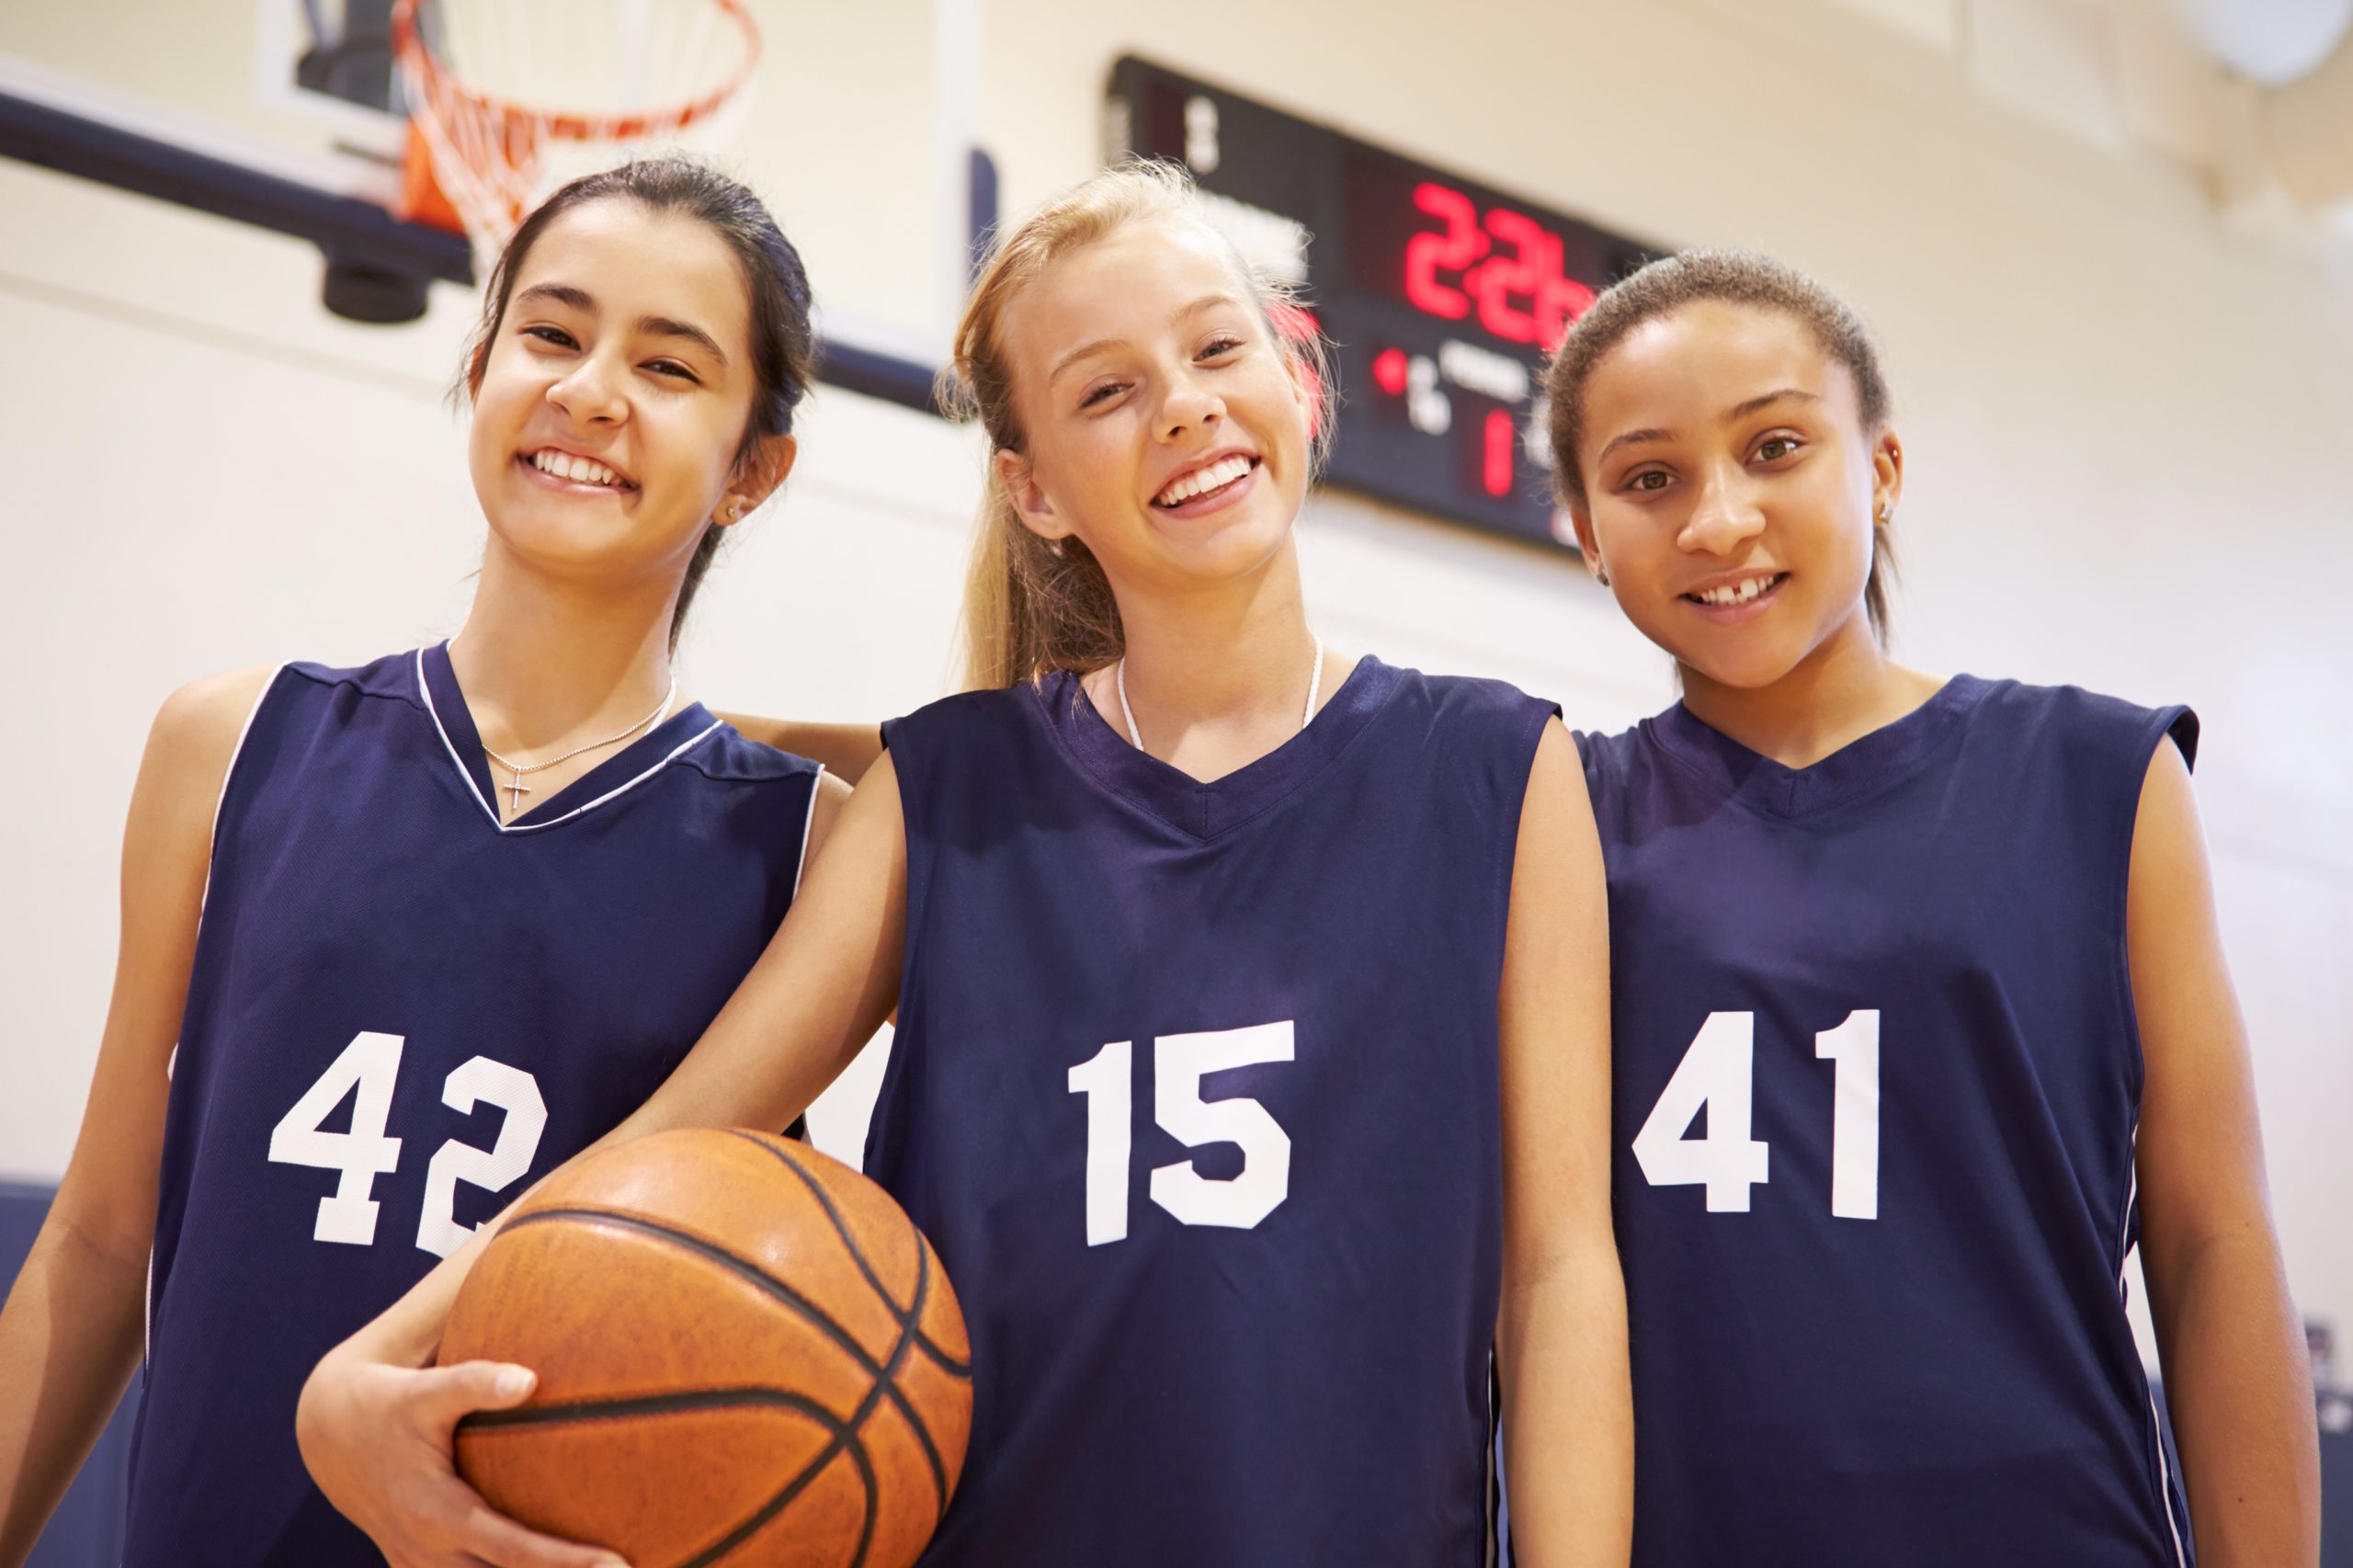 Spillane Middle School Physicals for Girls Athletics - April 29th